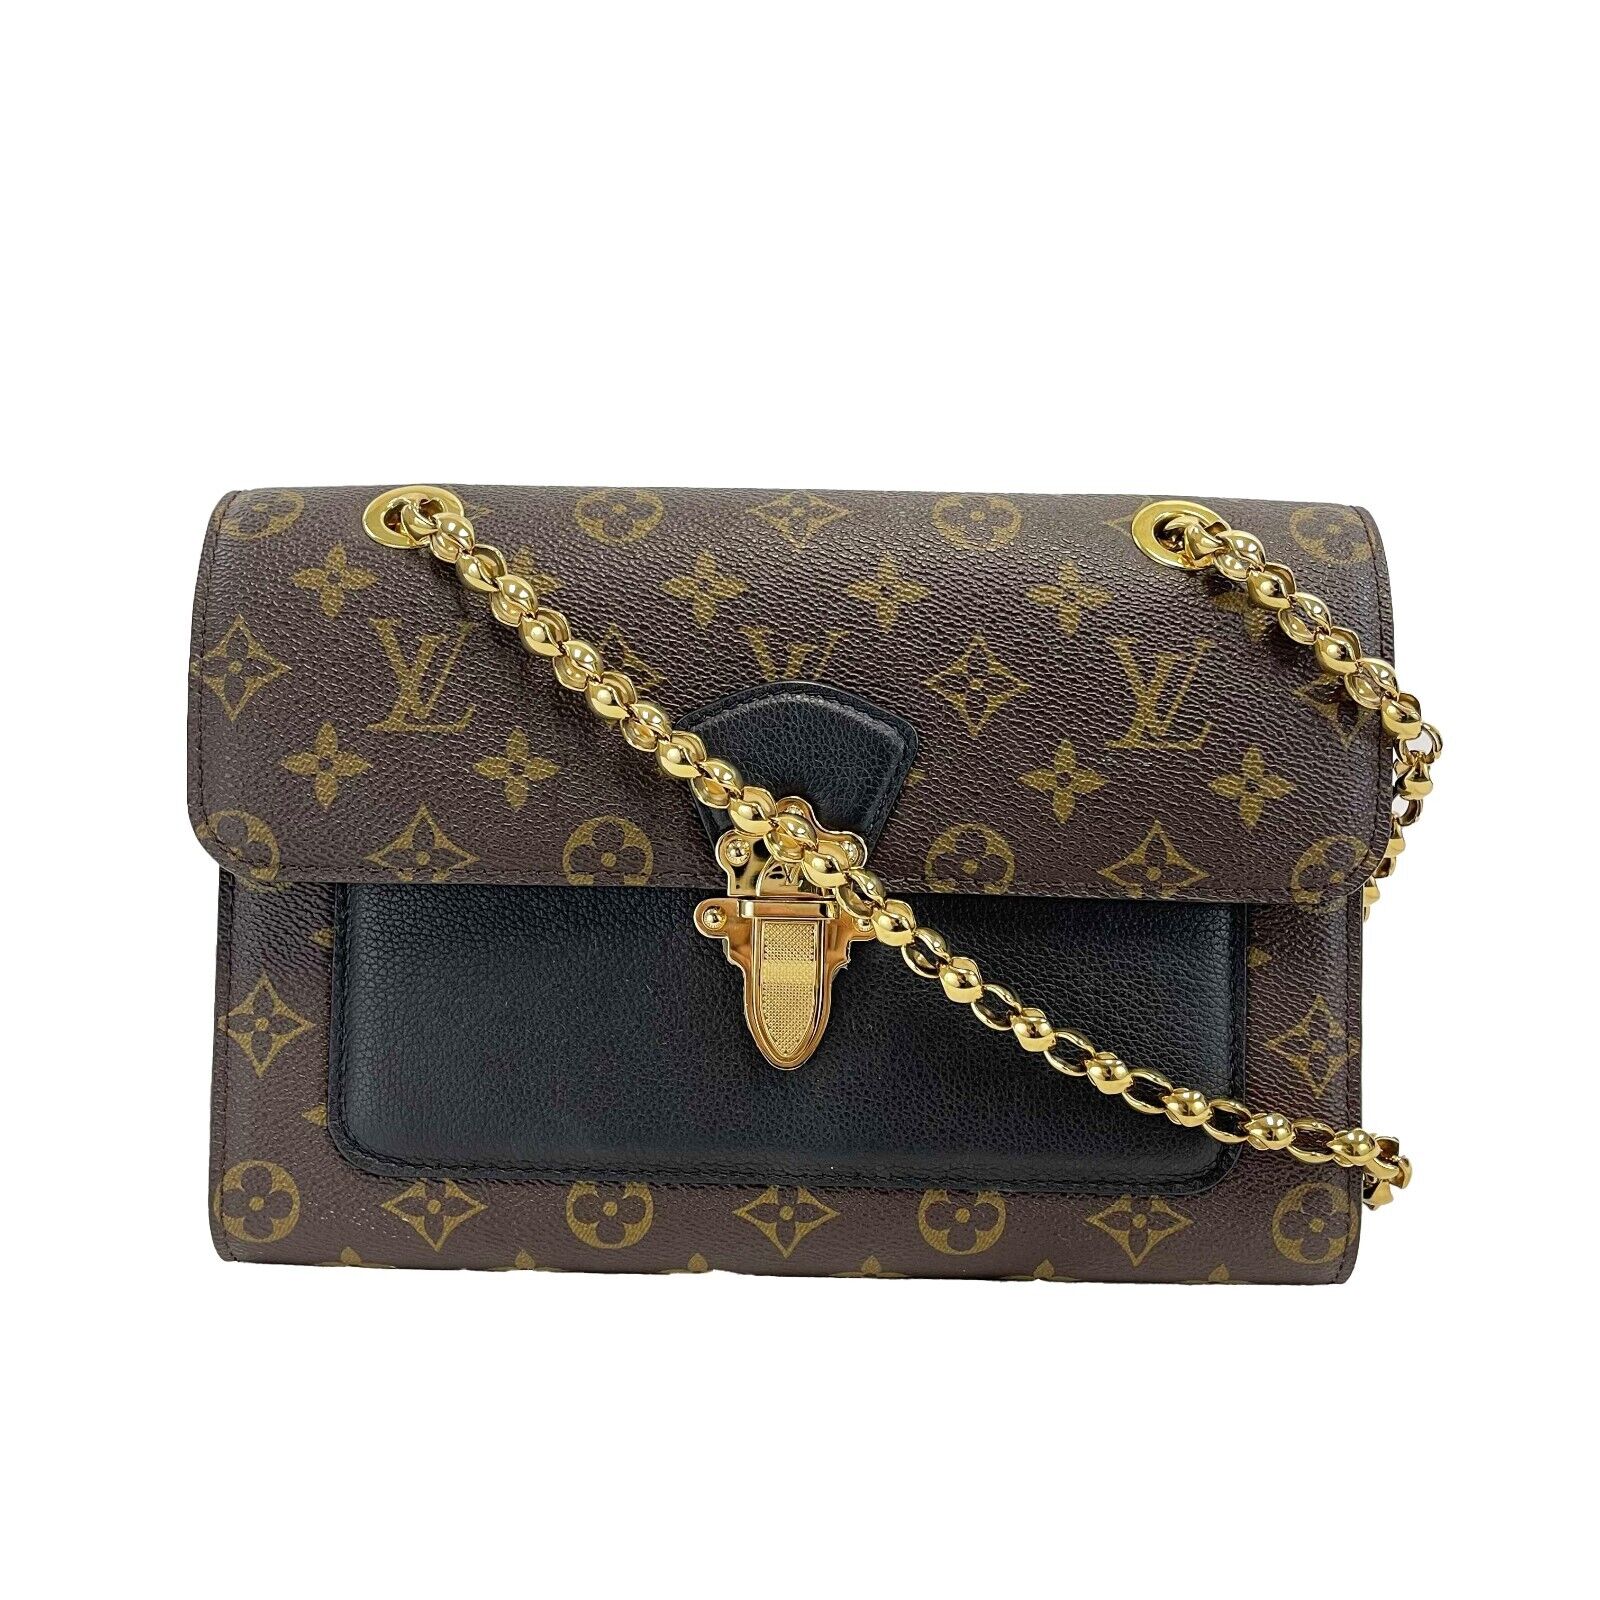 lv victoire bag outfit